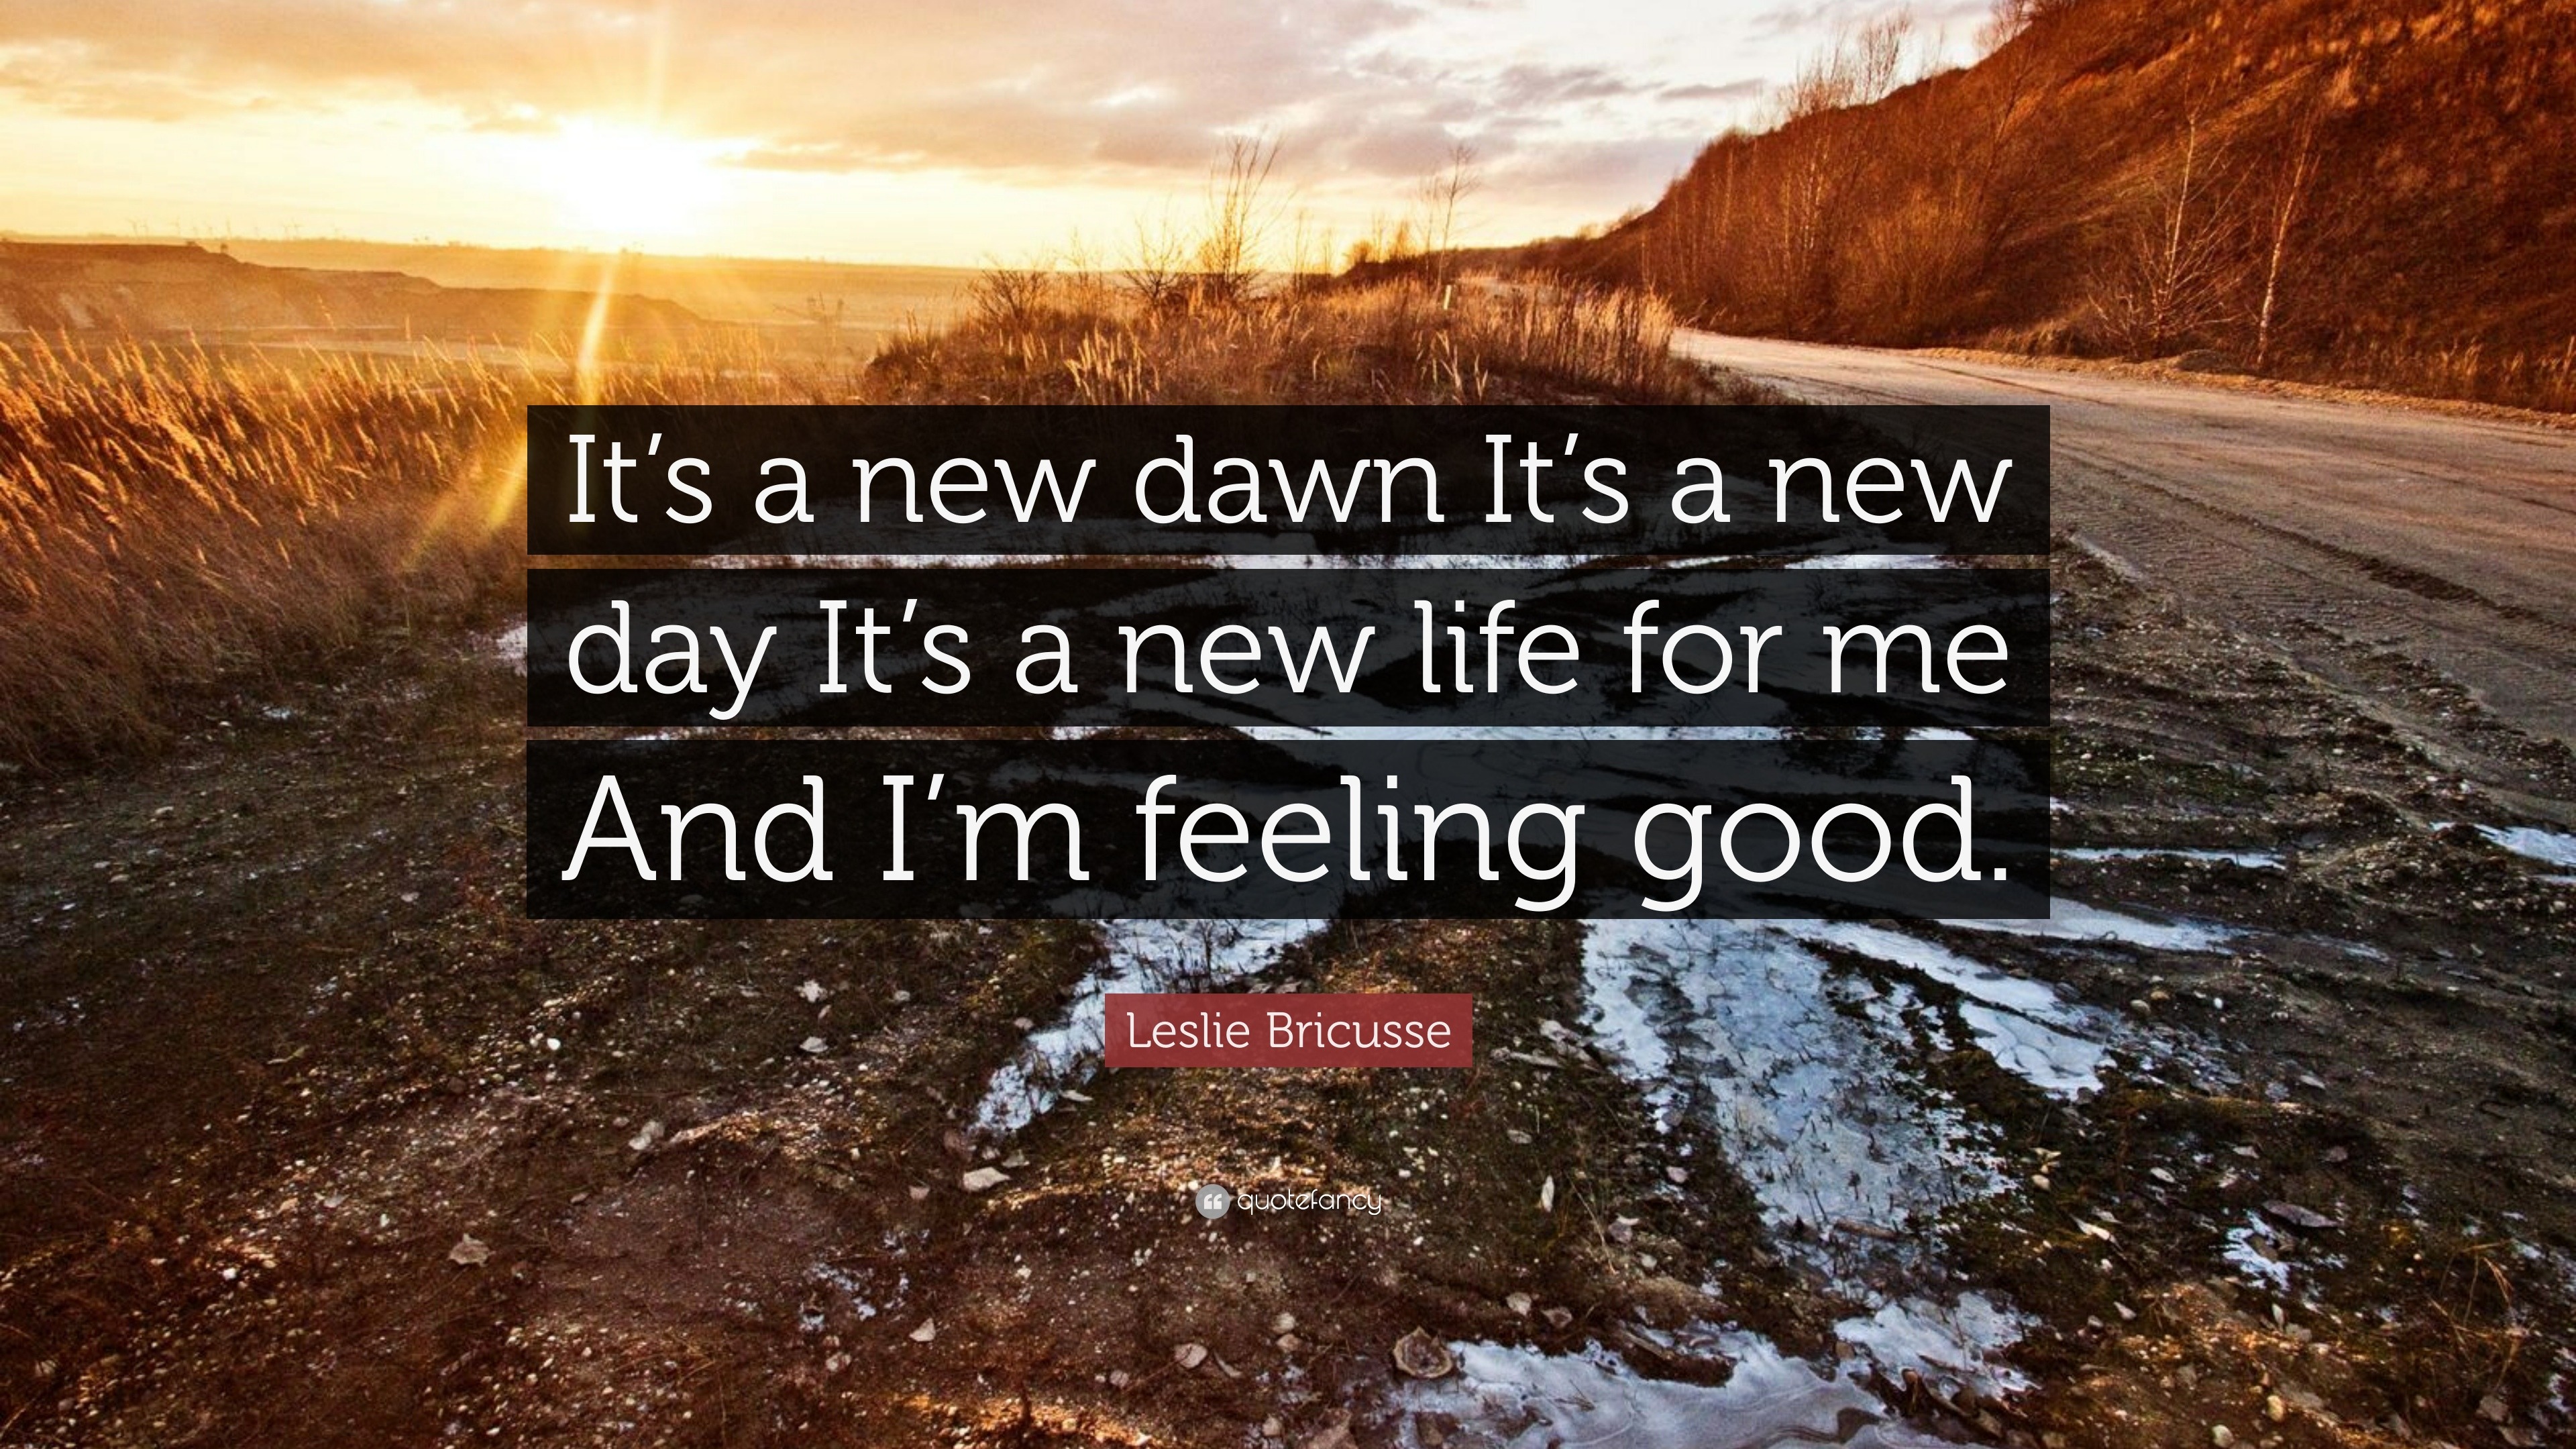 Leslie Bricusse Quote It S A New Dawn It S A New Day It S A New Life For Me And I M Feeling Good 9 Wallpapers Quotefancy